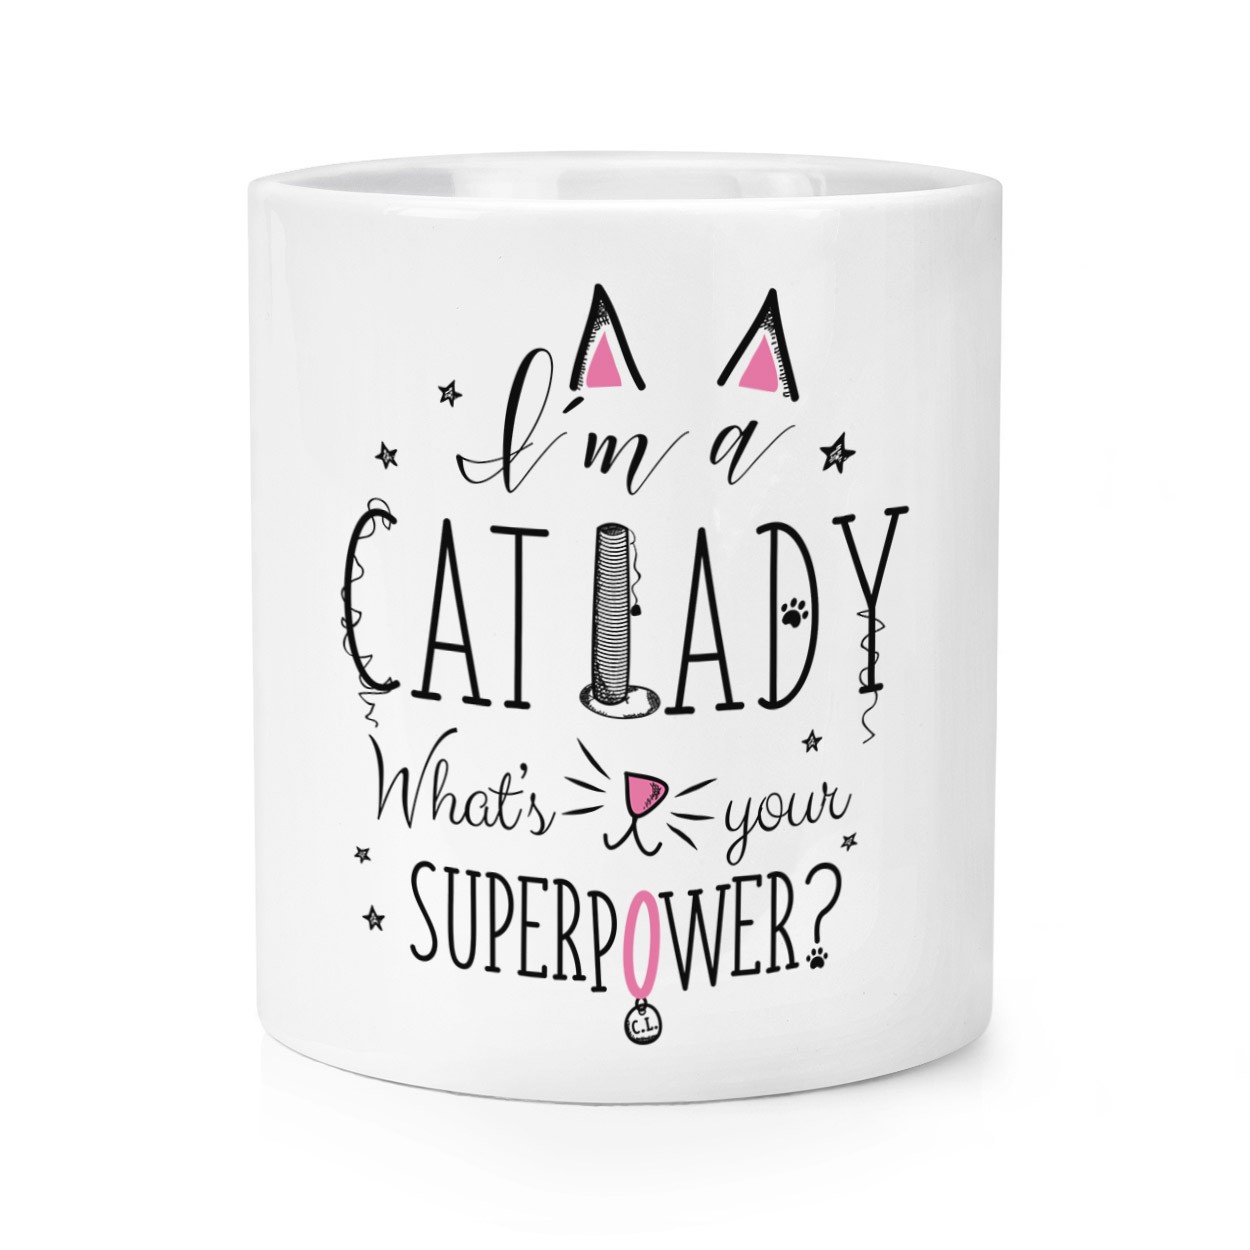 I'm A Cat Lady What's Your Superpower Makeup Brush Pencil Pot